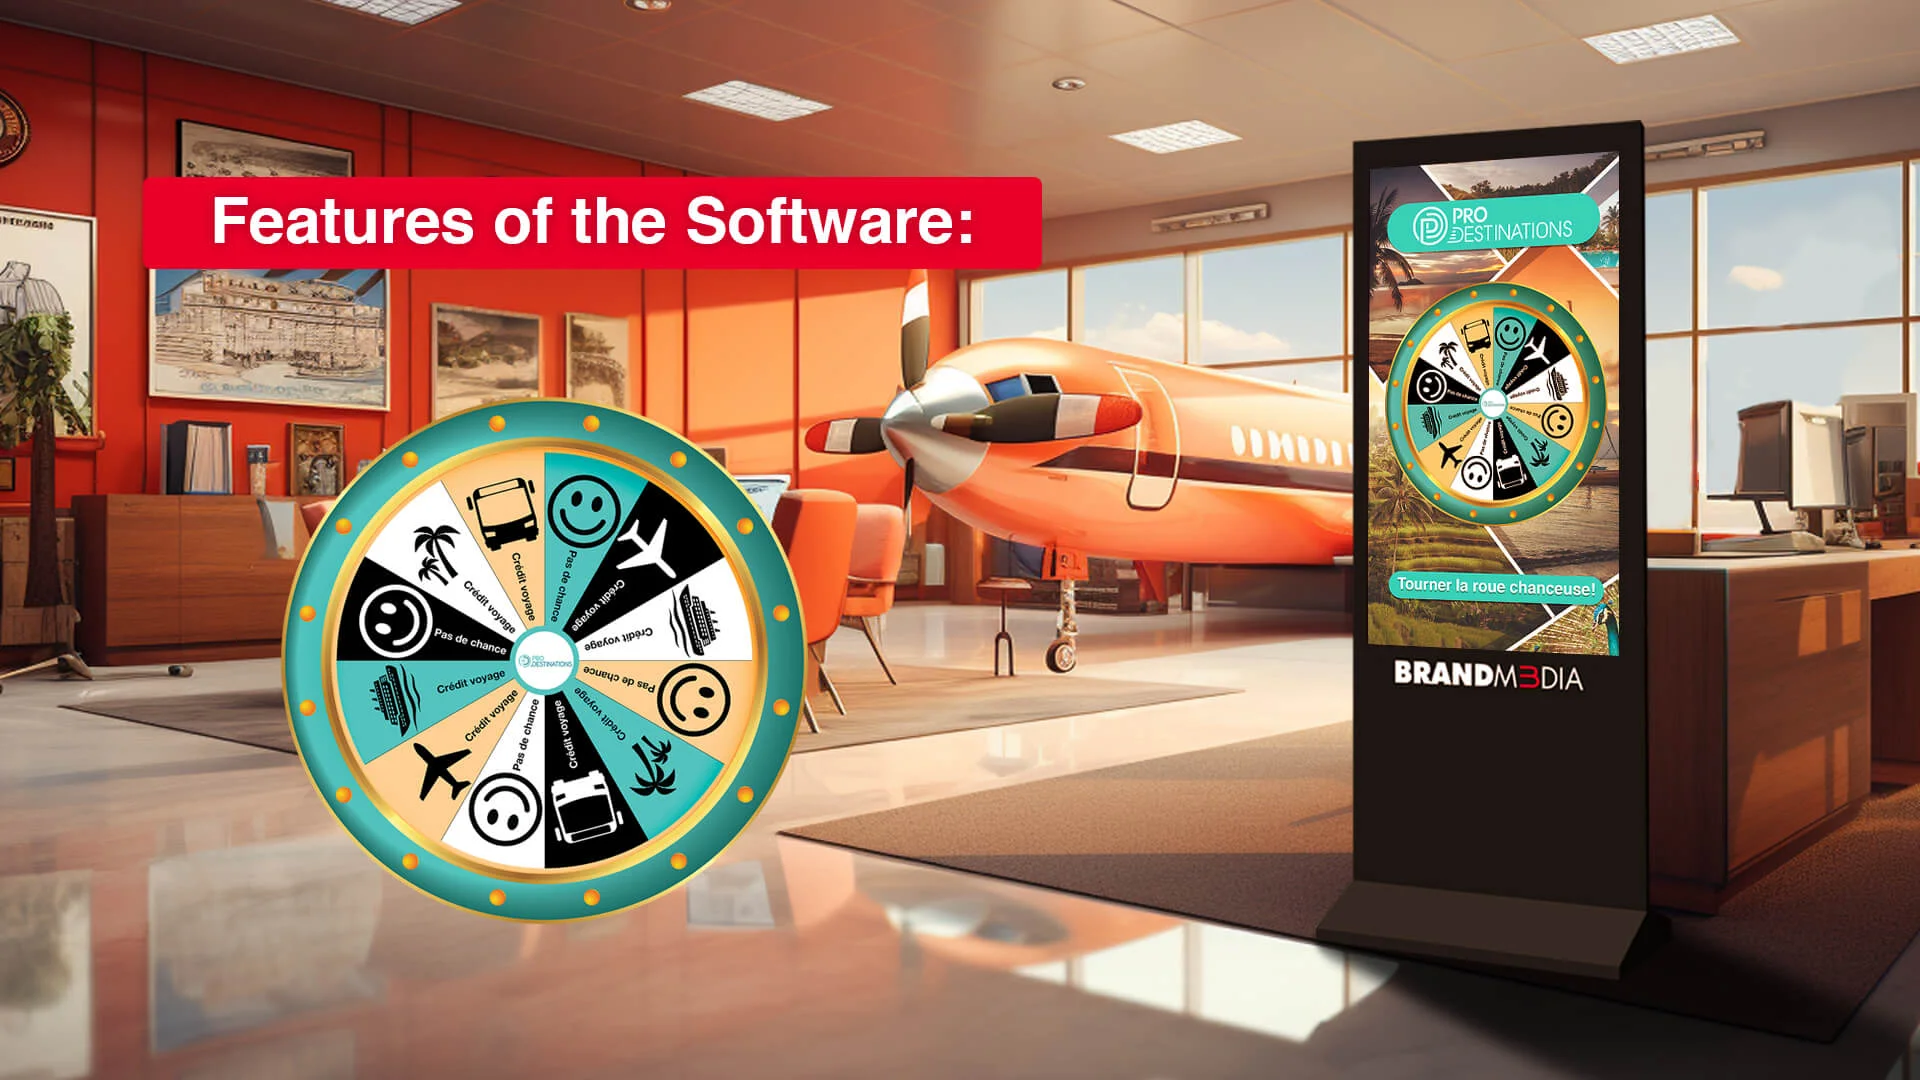 Brandm3dia- features of the software